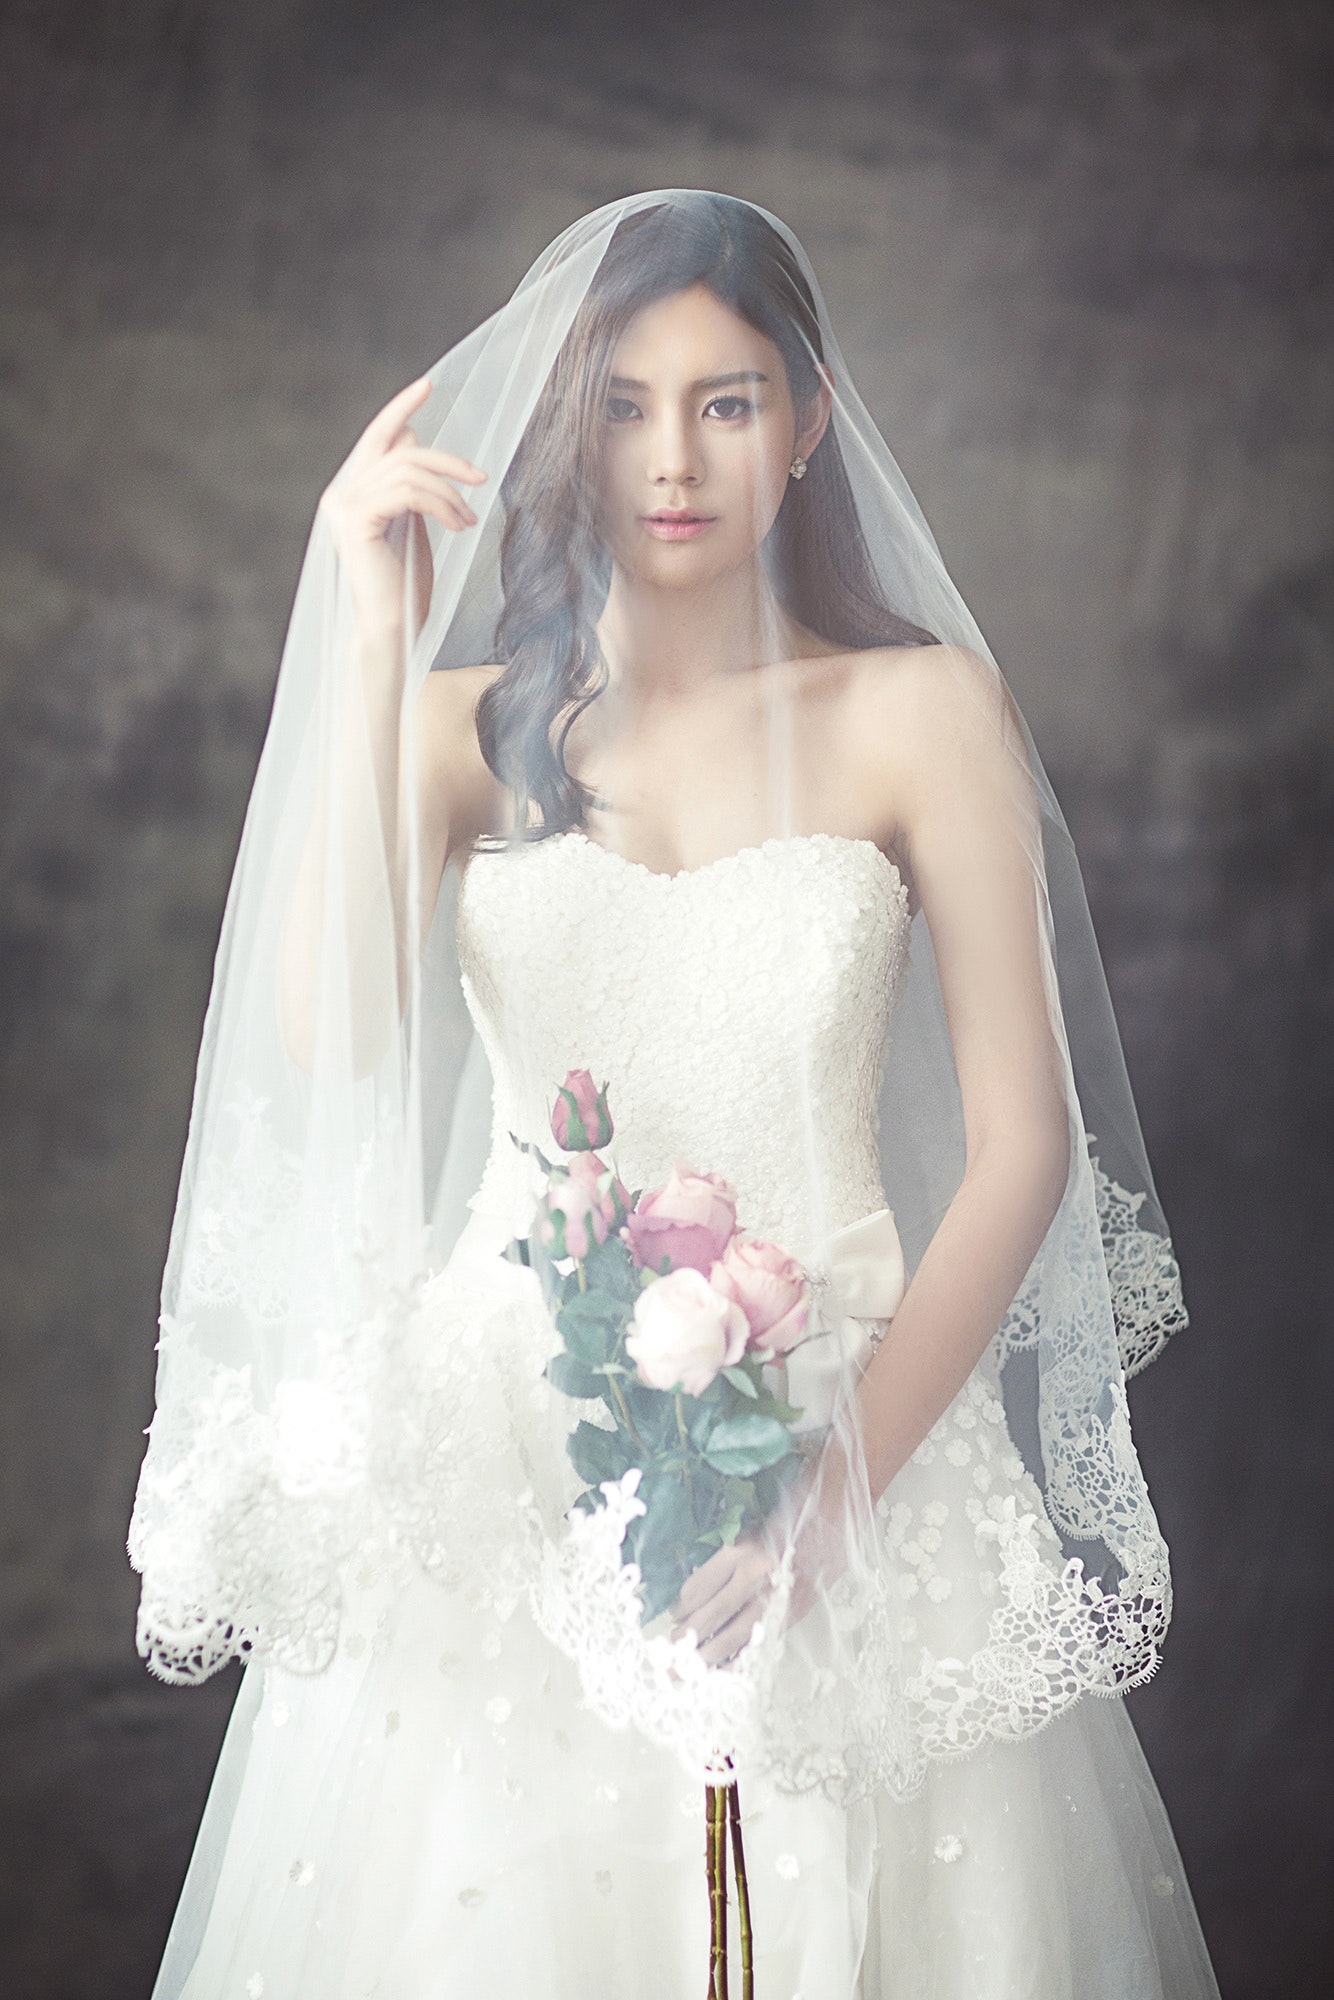 Woman in white strapless sweetheart wedding dress with rose bouquet covered in white veil photo